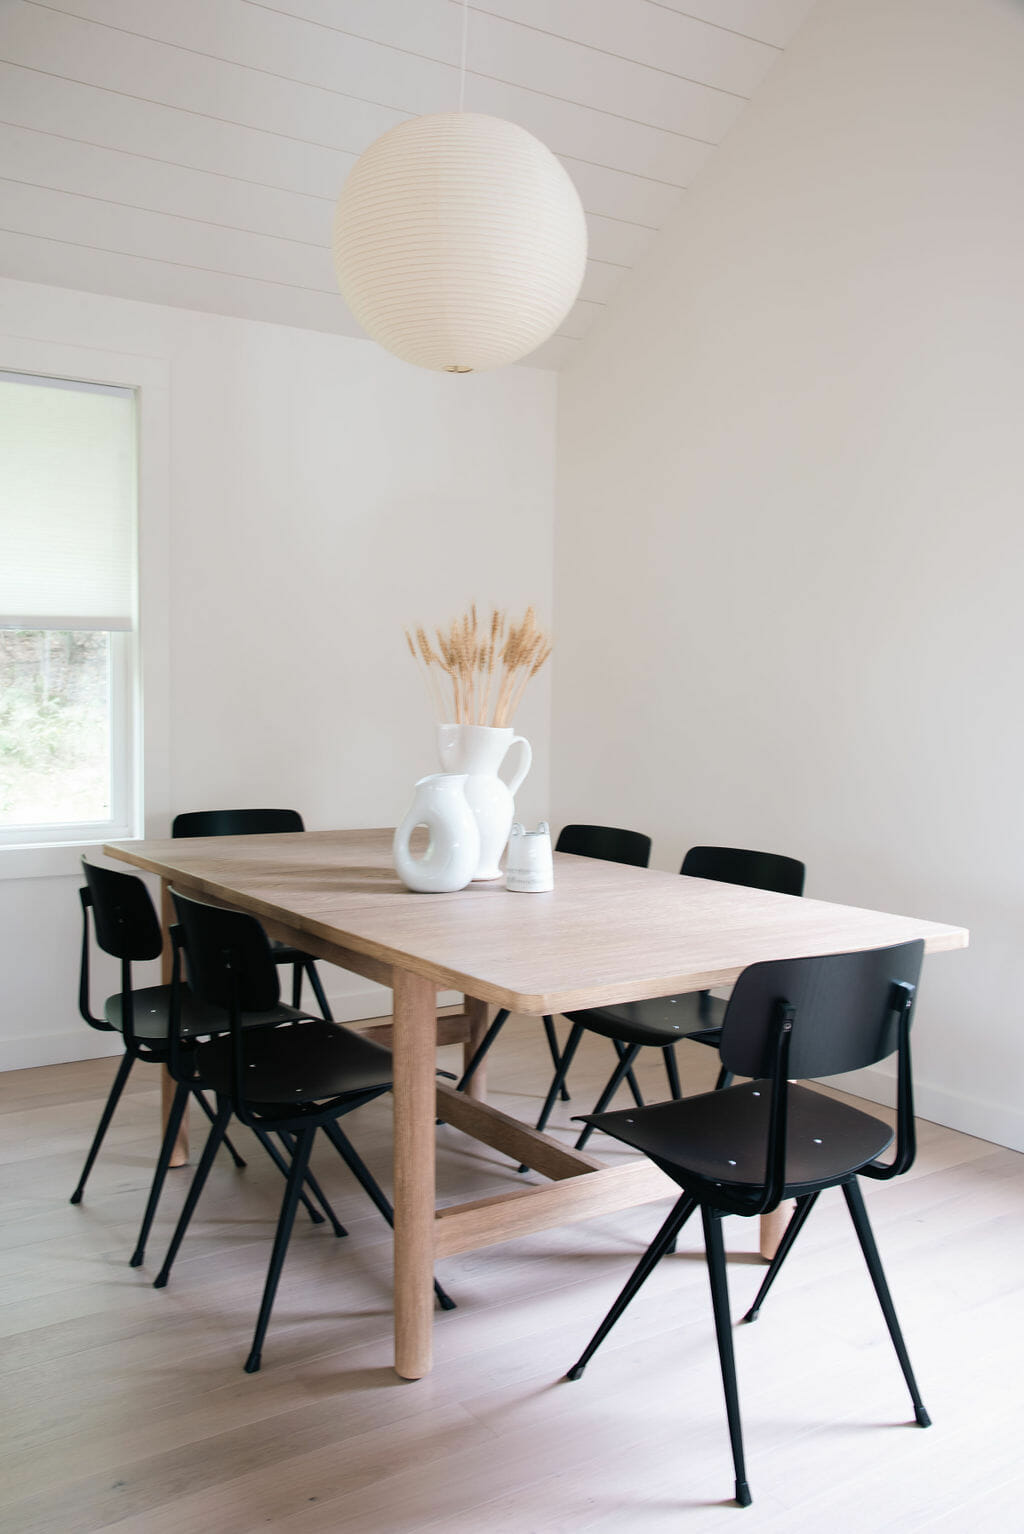 Light wood table with six black chairs around it and a globe shaped ceiling light overhead